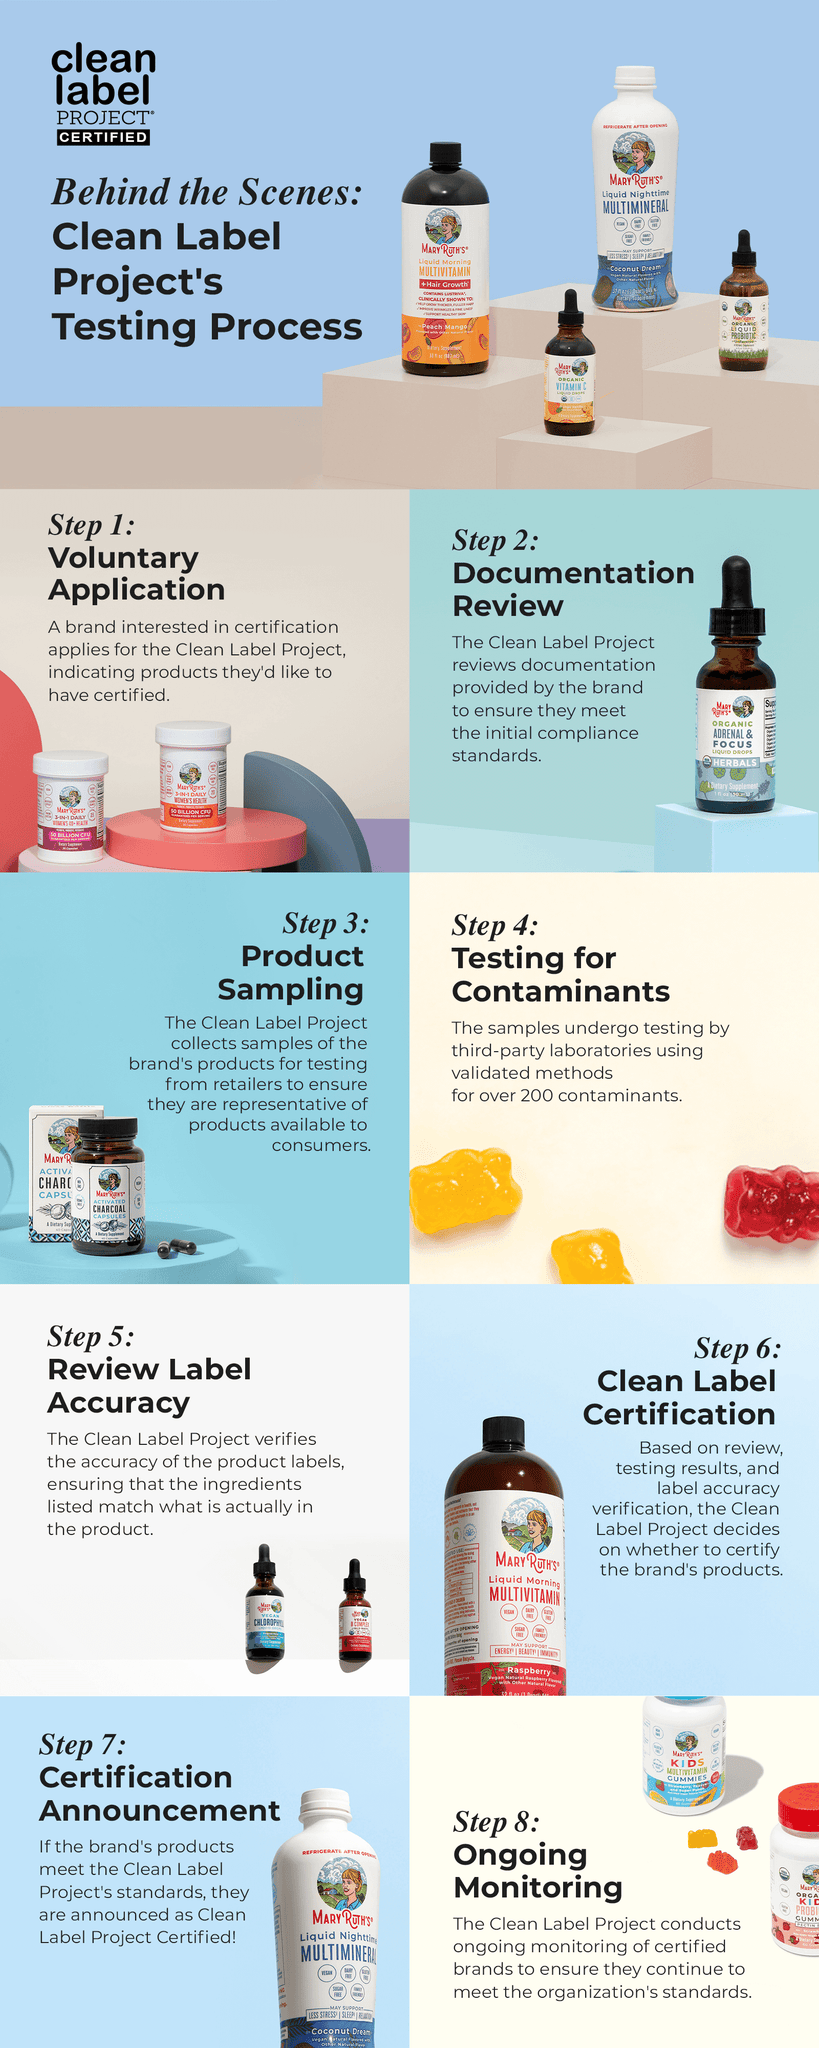 Behind the Scenes: MaryRuth’s Testing Process With Clean Label Project